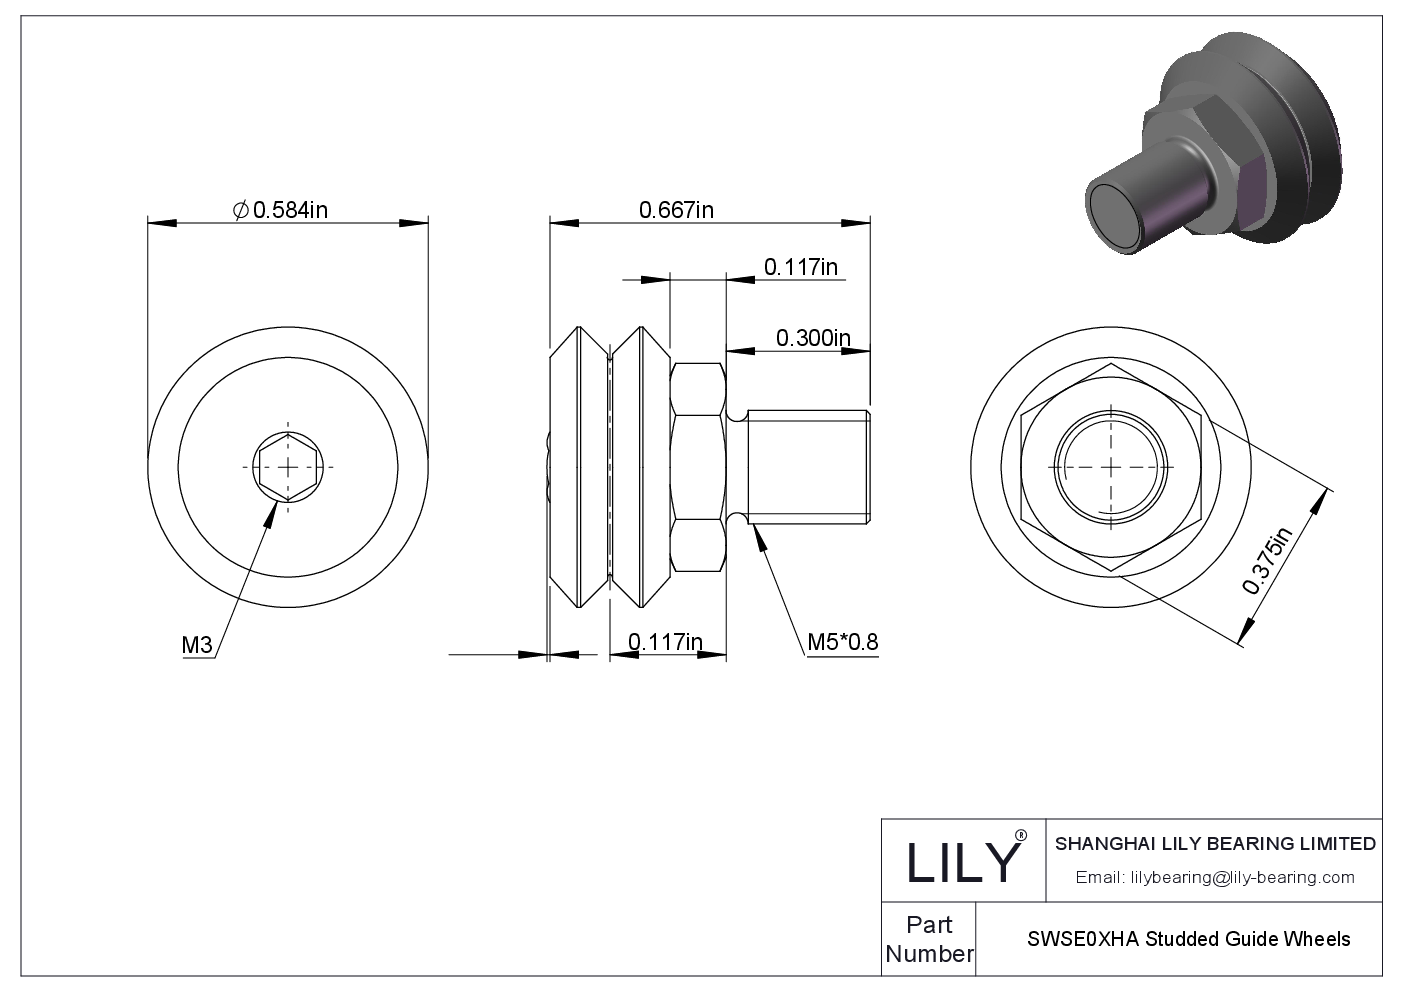 SWSE0XHA Studded Guide Wheels cad drawing